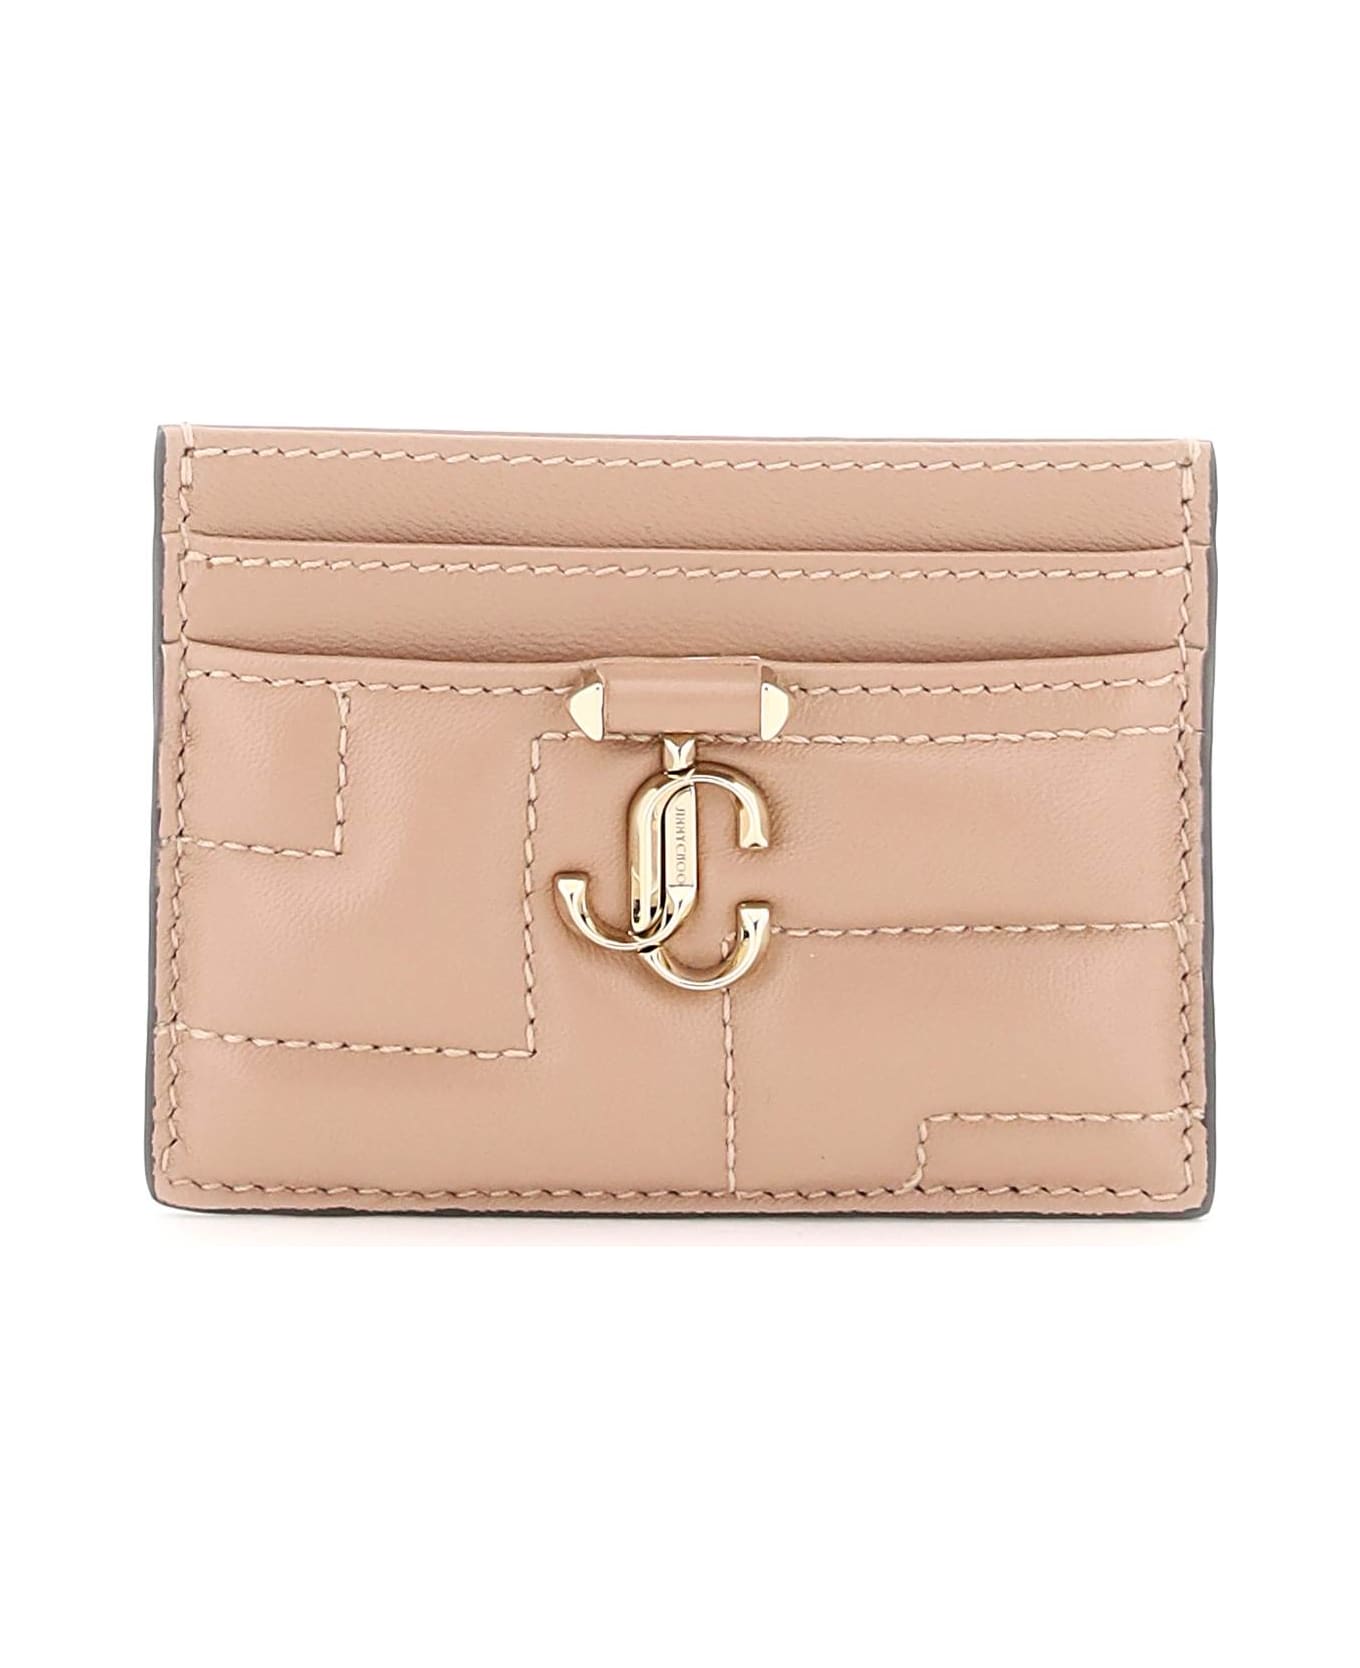 Jimmy Choo Quilted Nappa Leather Card Holder - BALLET PINK LIGHT GOLD (Pink)